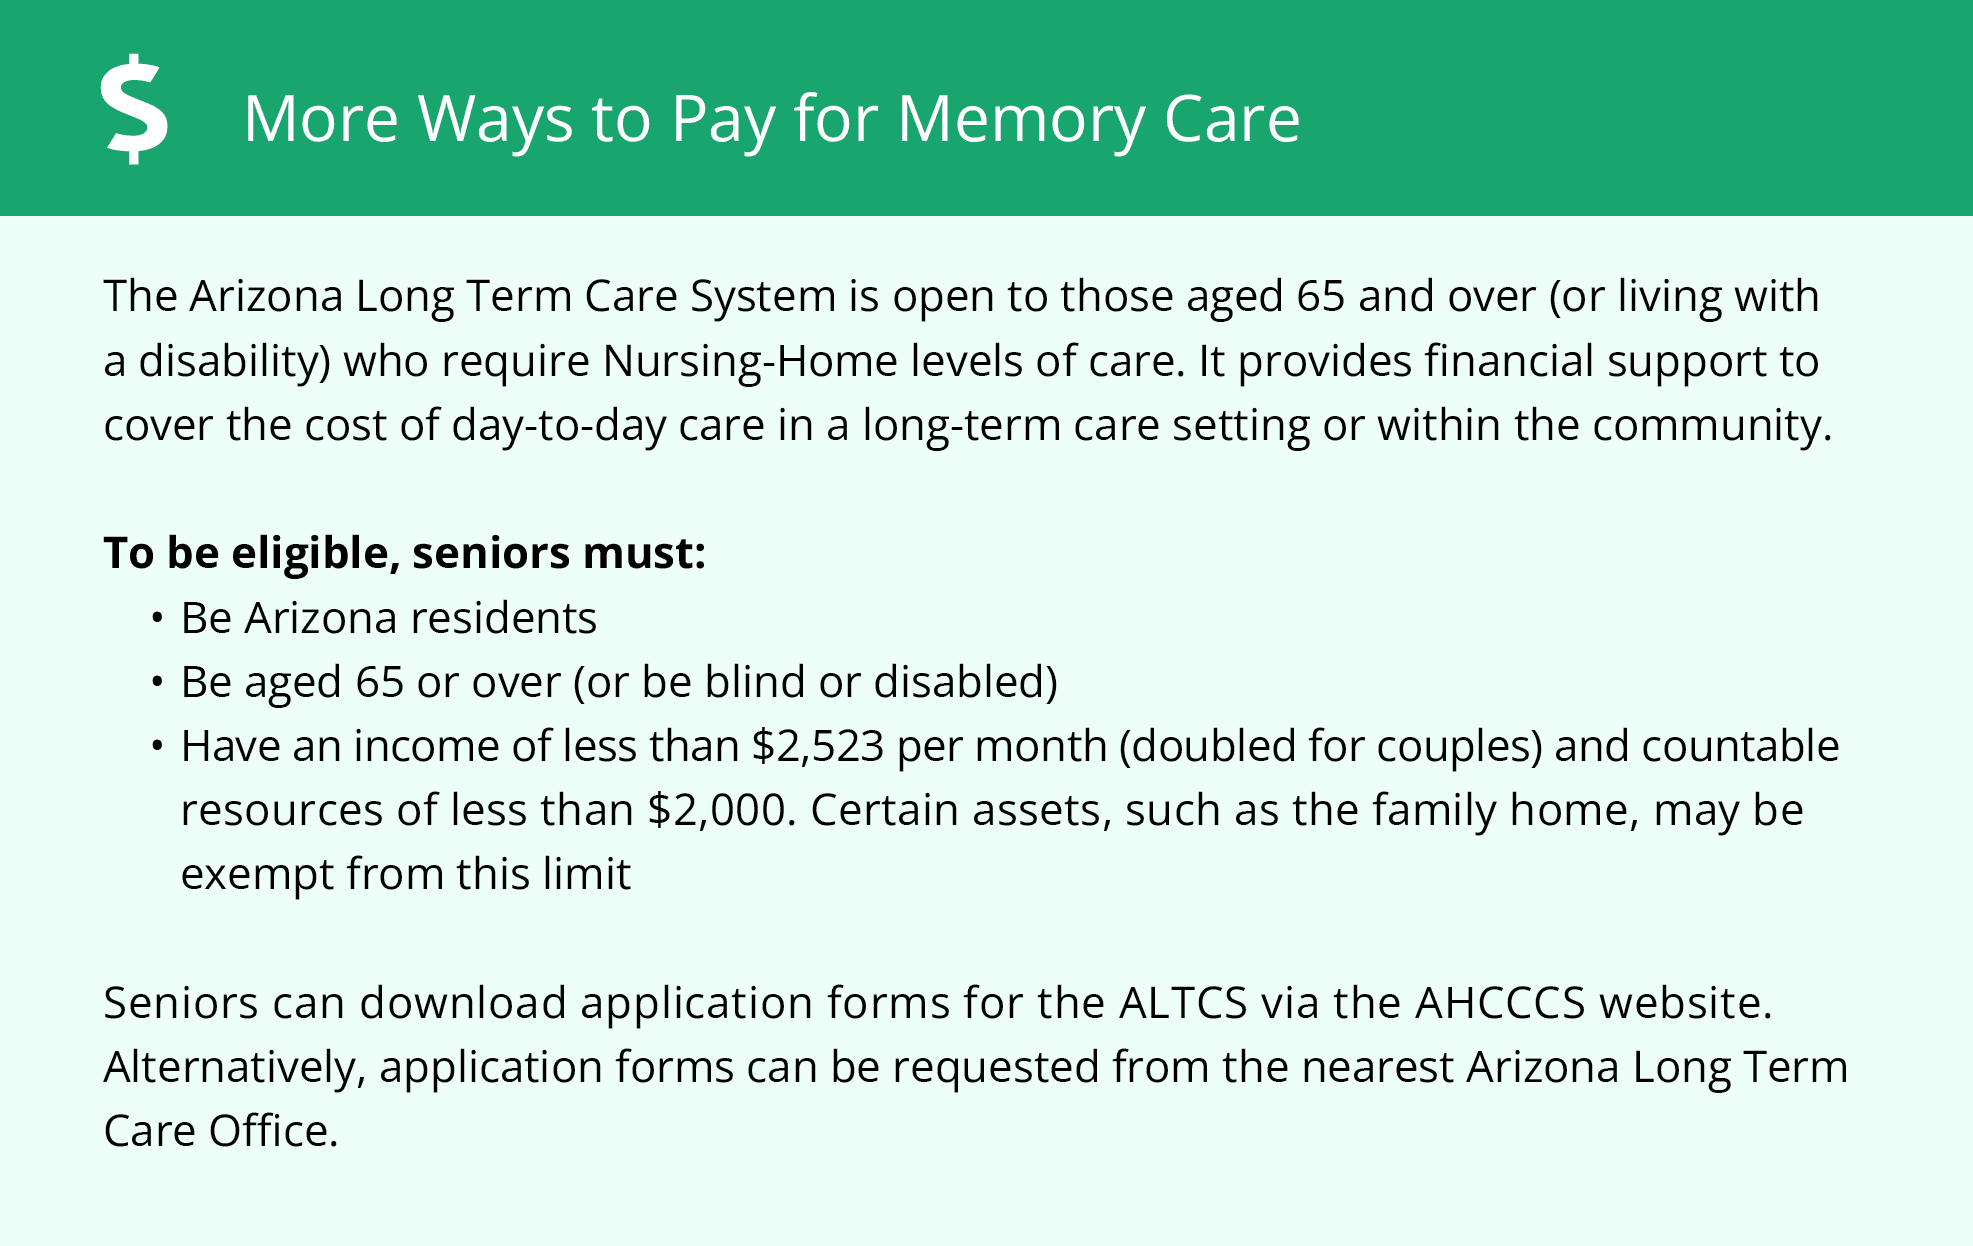 More ways to pay for memory care in AZ